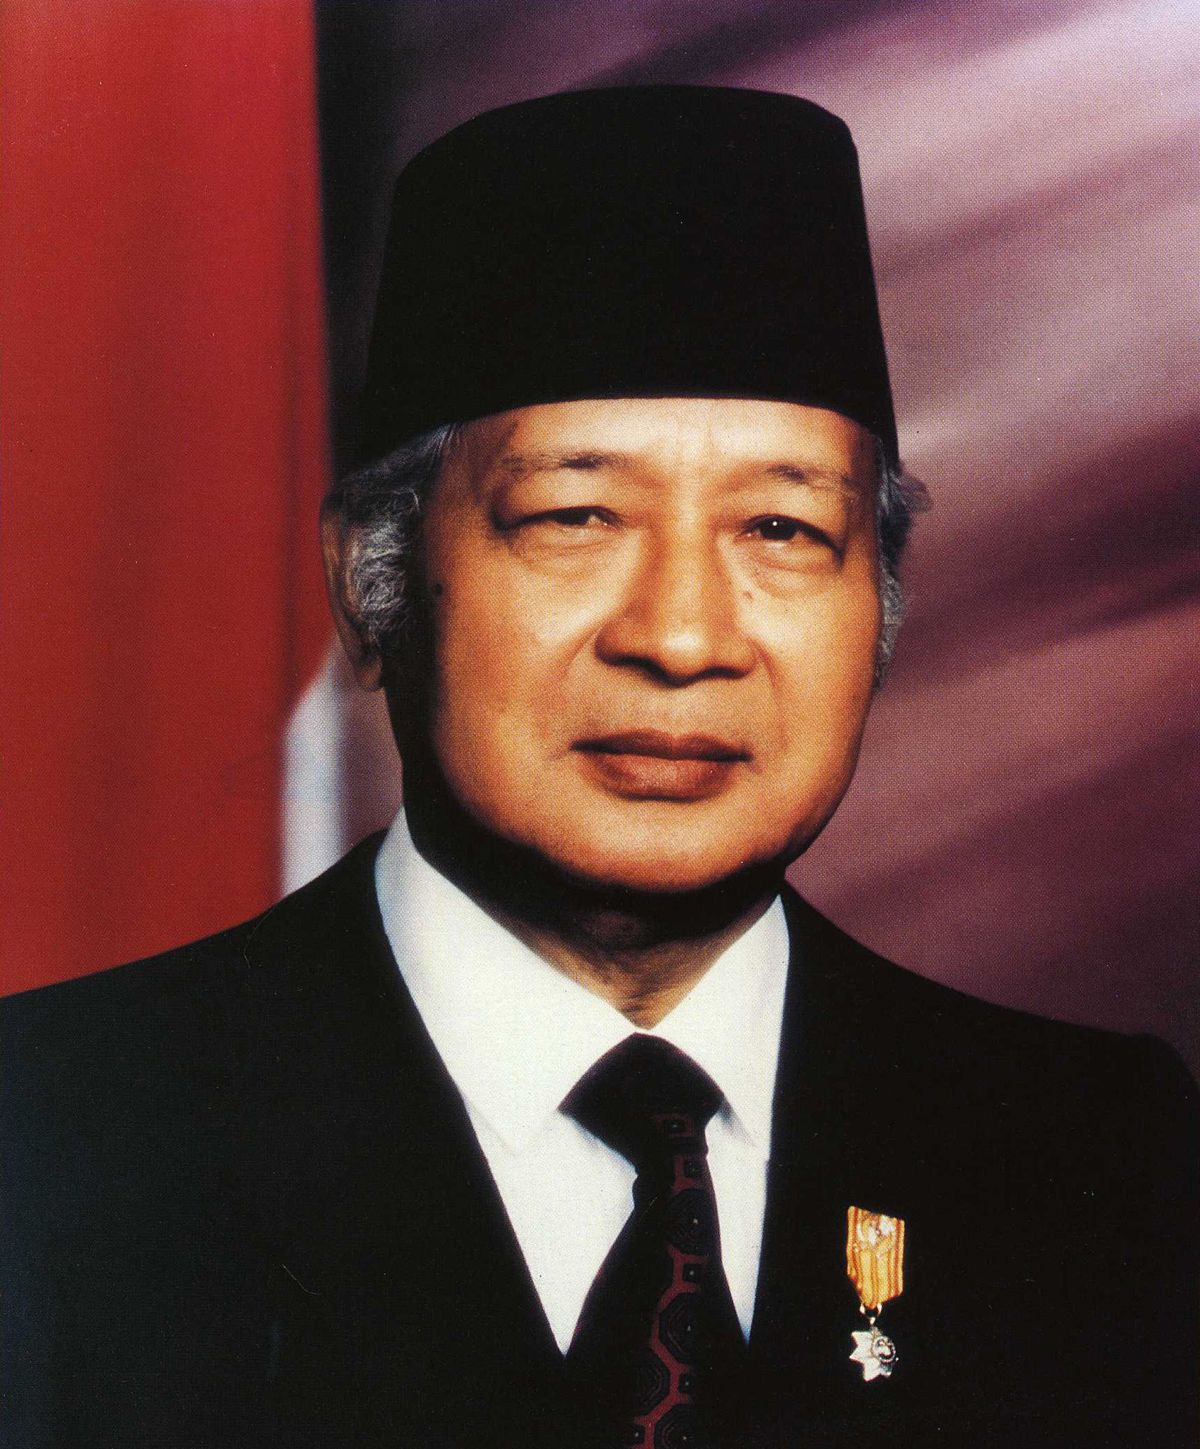 2008: Indonesian President Suharto once Served in the Dutch Army